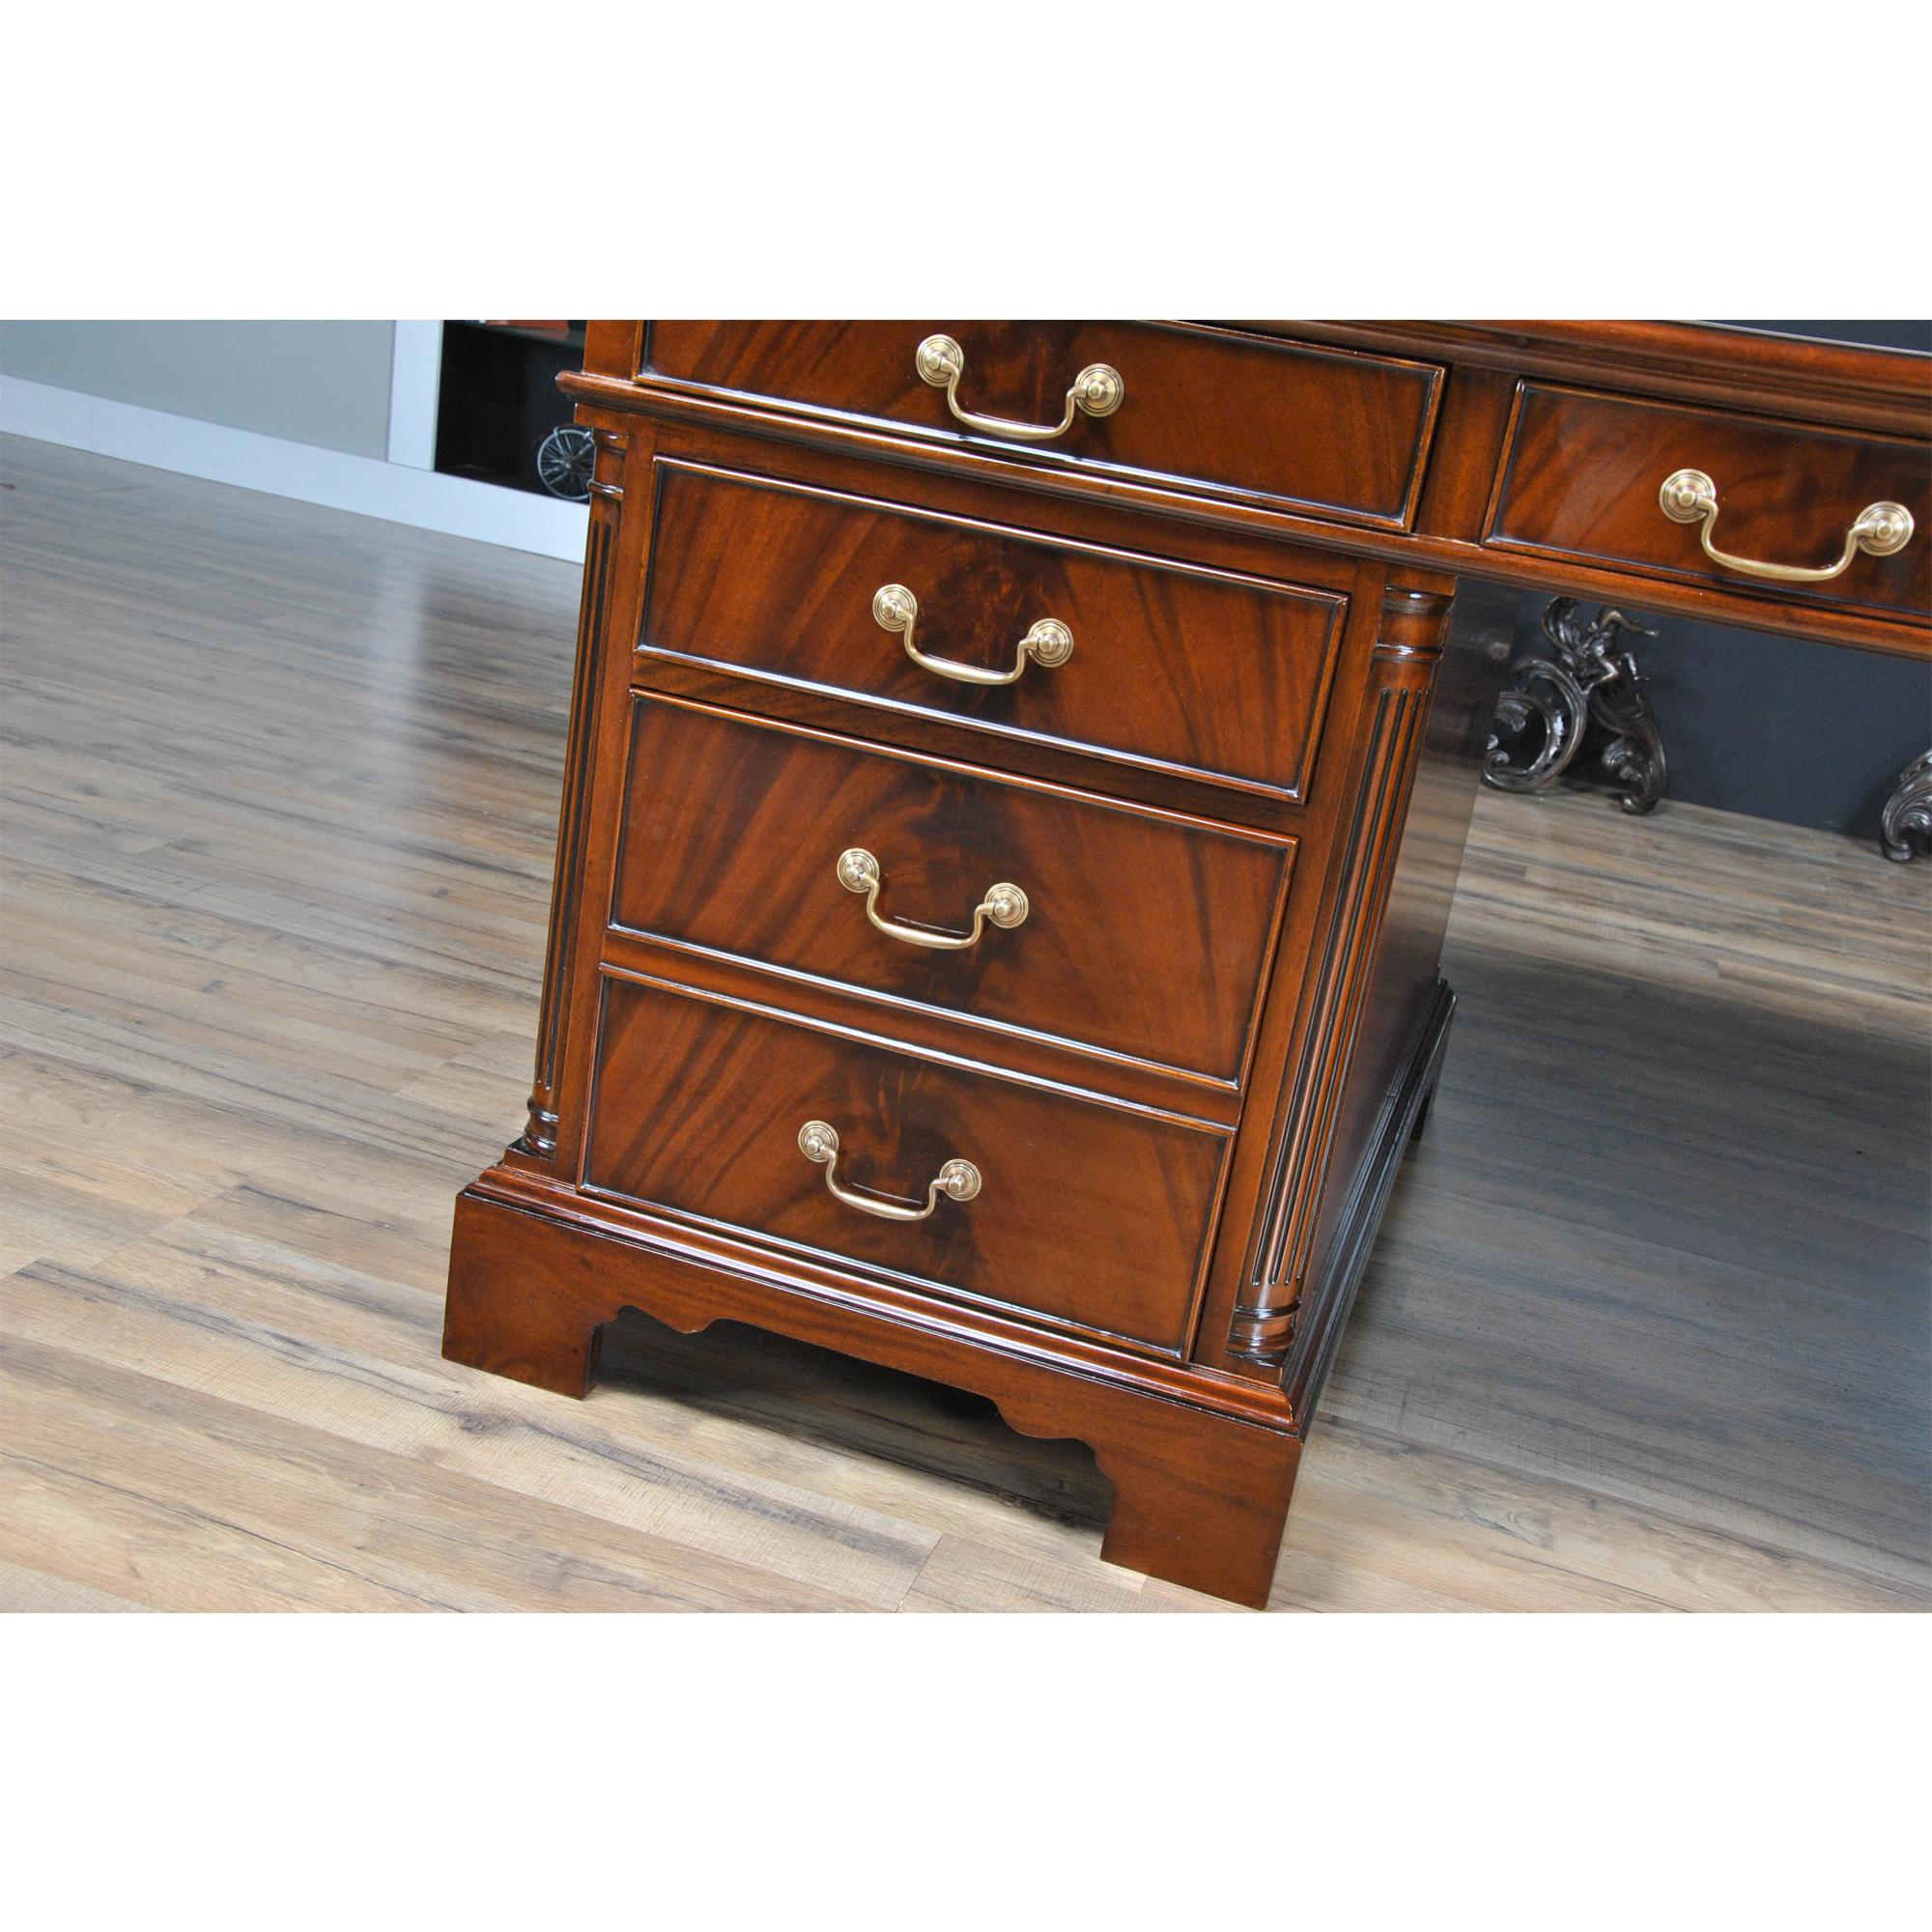 Large Mahogany Executive Desk In New Condition For Sale In Annville, PA